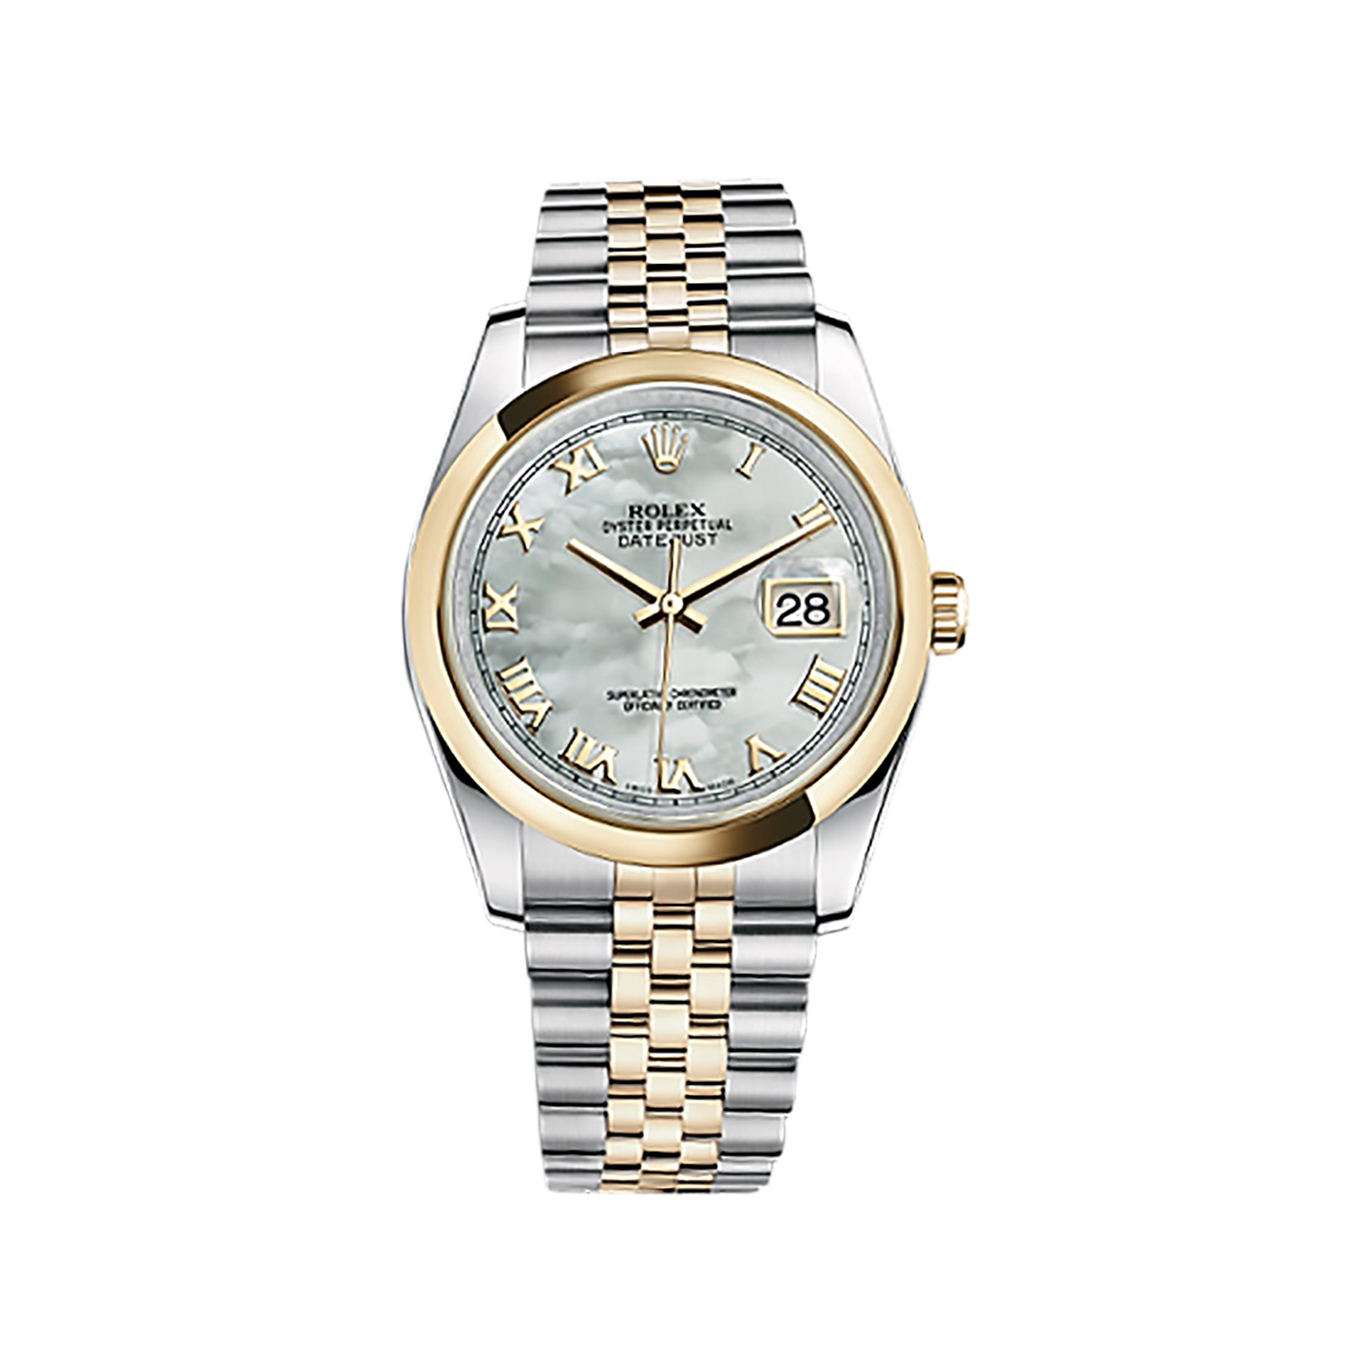 Datejust 36 116203 Gold & Stainless Steel Watch (White Mother-of-Pearl)